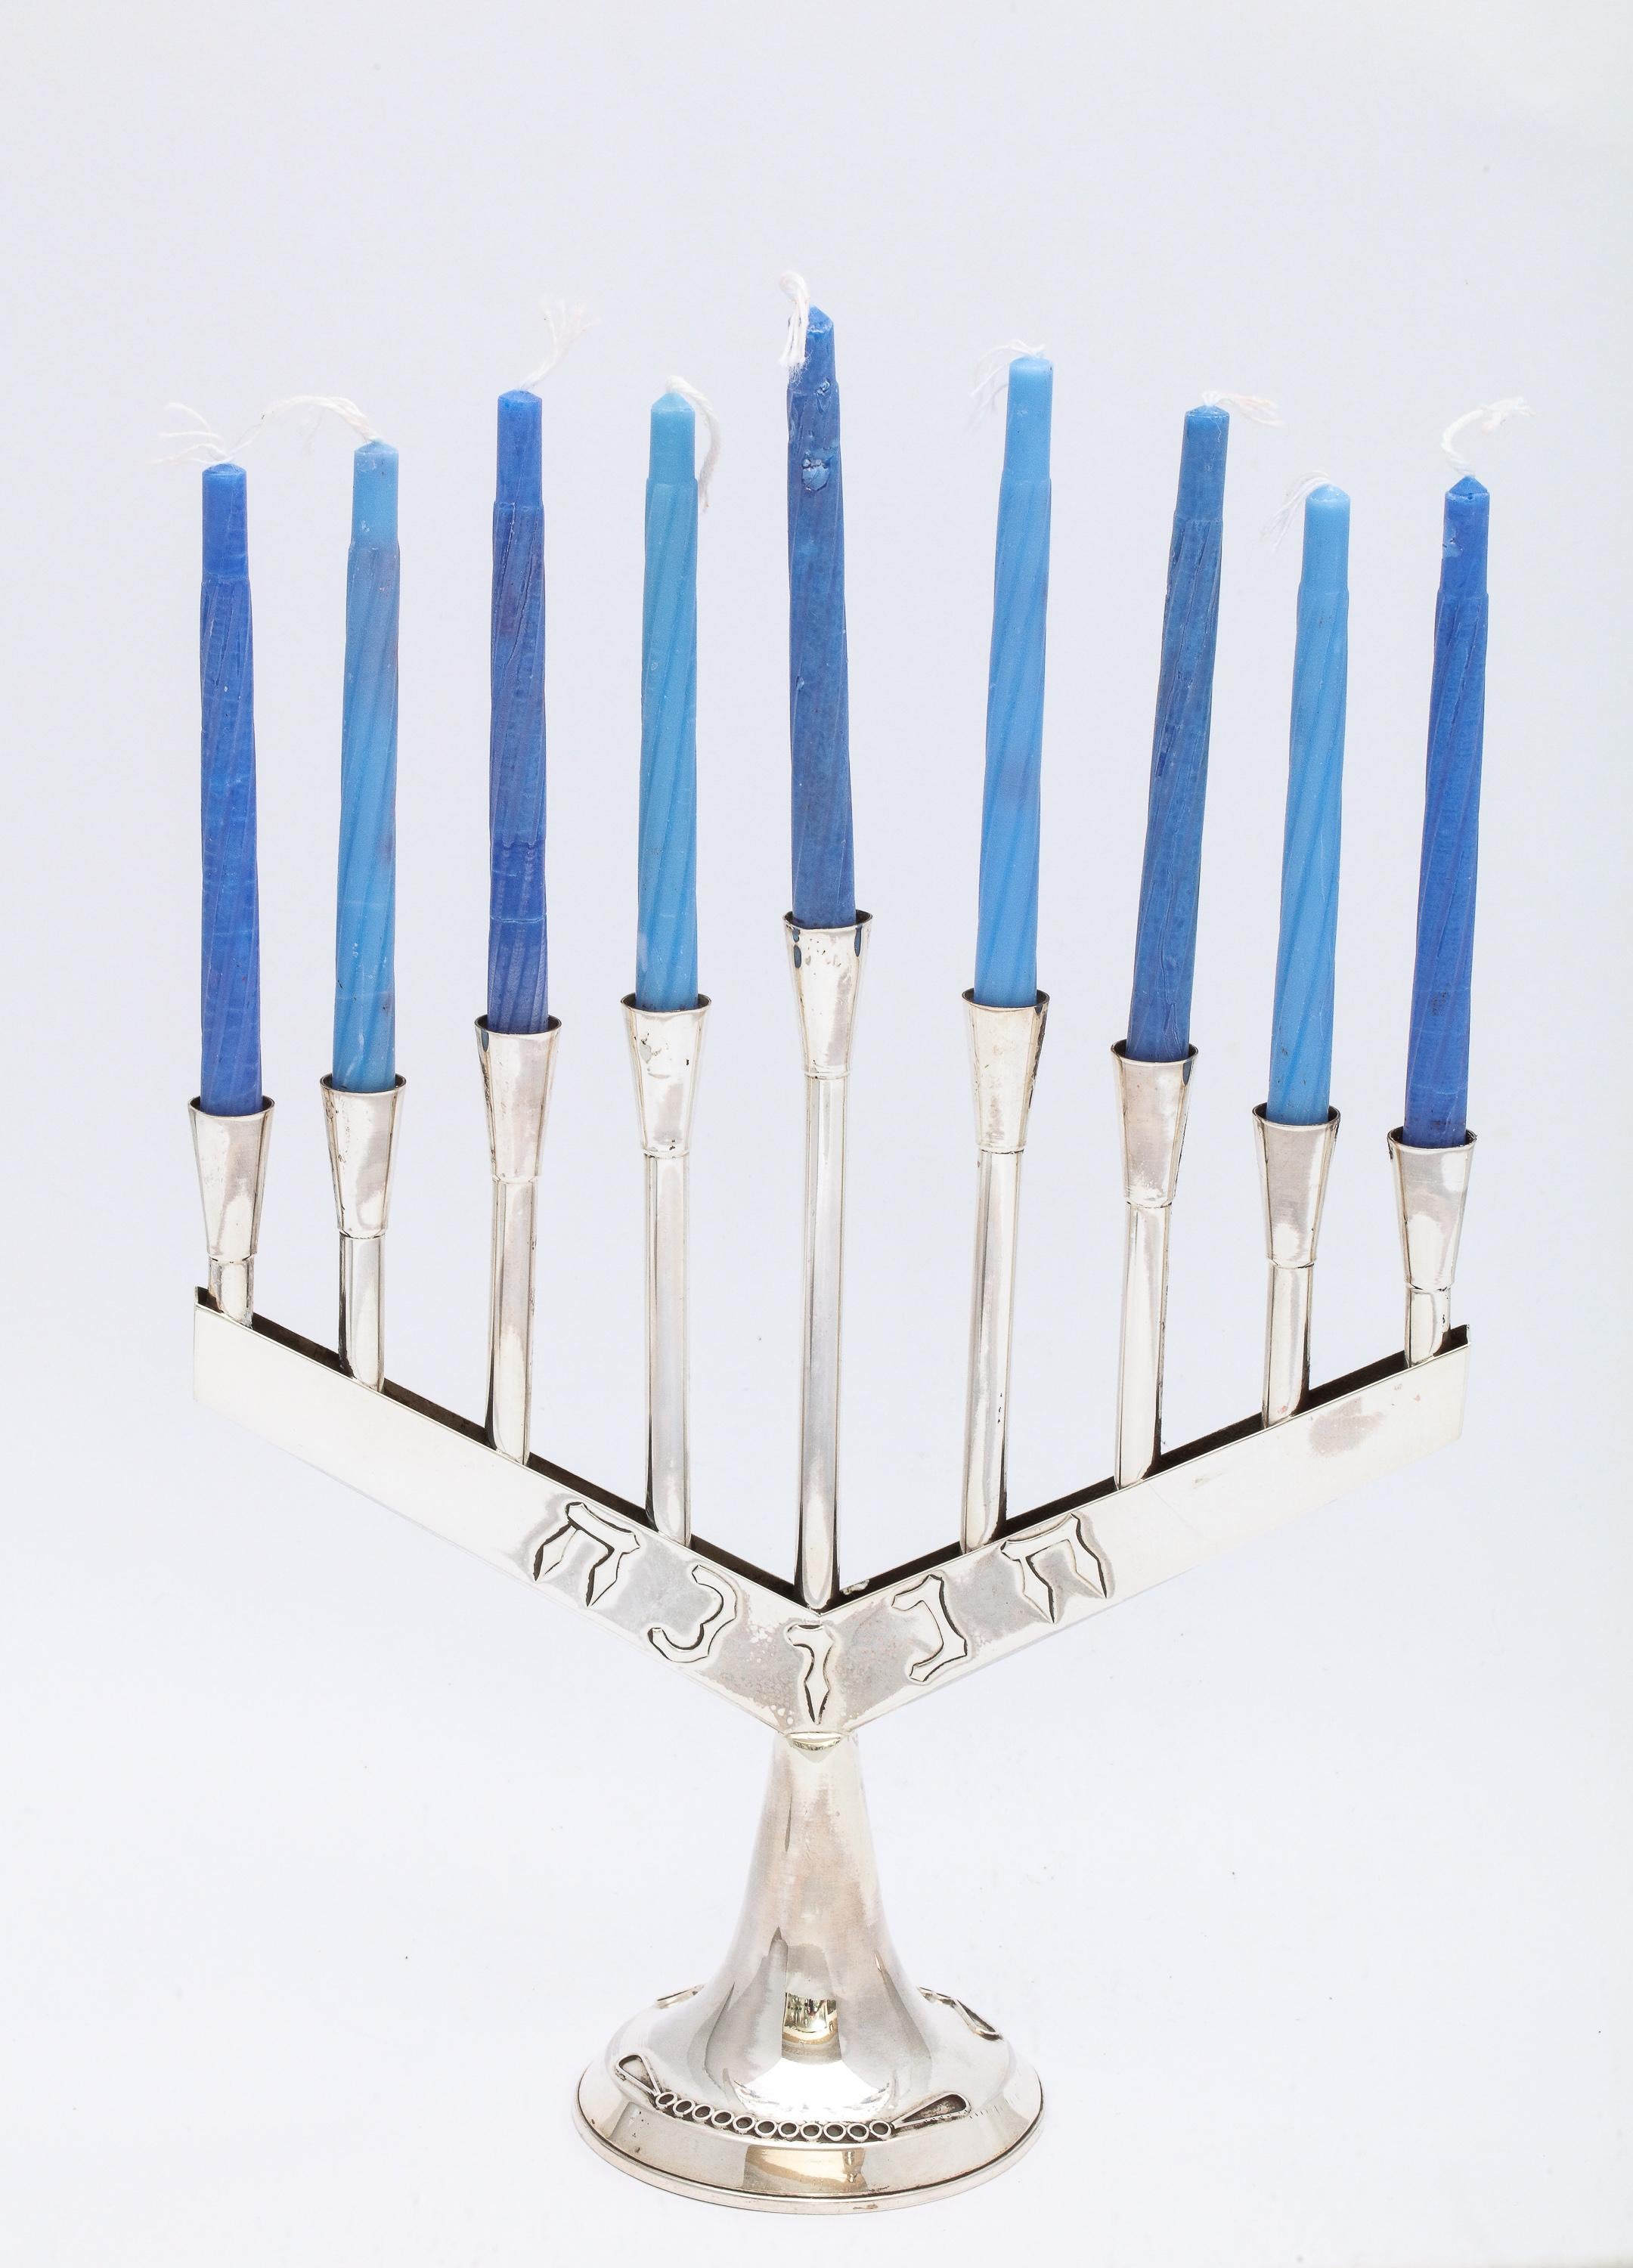 Mid-Century-Modern, sterling silver menorah, Israel, Ca. 1960's. Measures 7 inches high x 7 inches wide (at widest point x 2 1/2 inches diameter across base. Weighs 3.500 troy ounces. The word Chanukah (in Hebrew) is part of the design on the